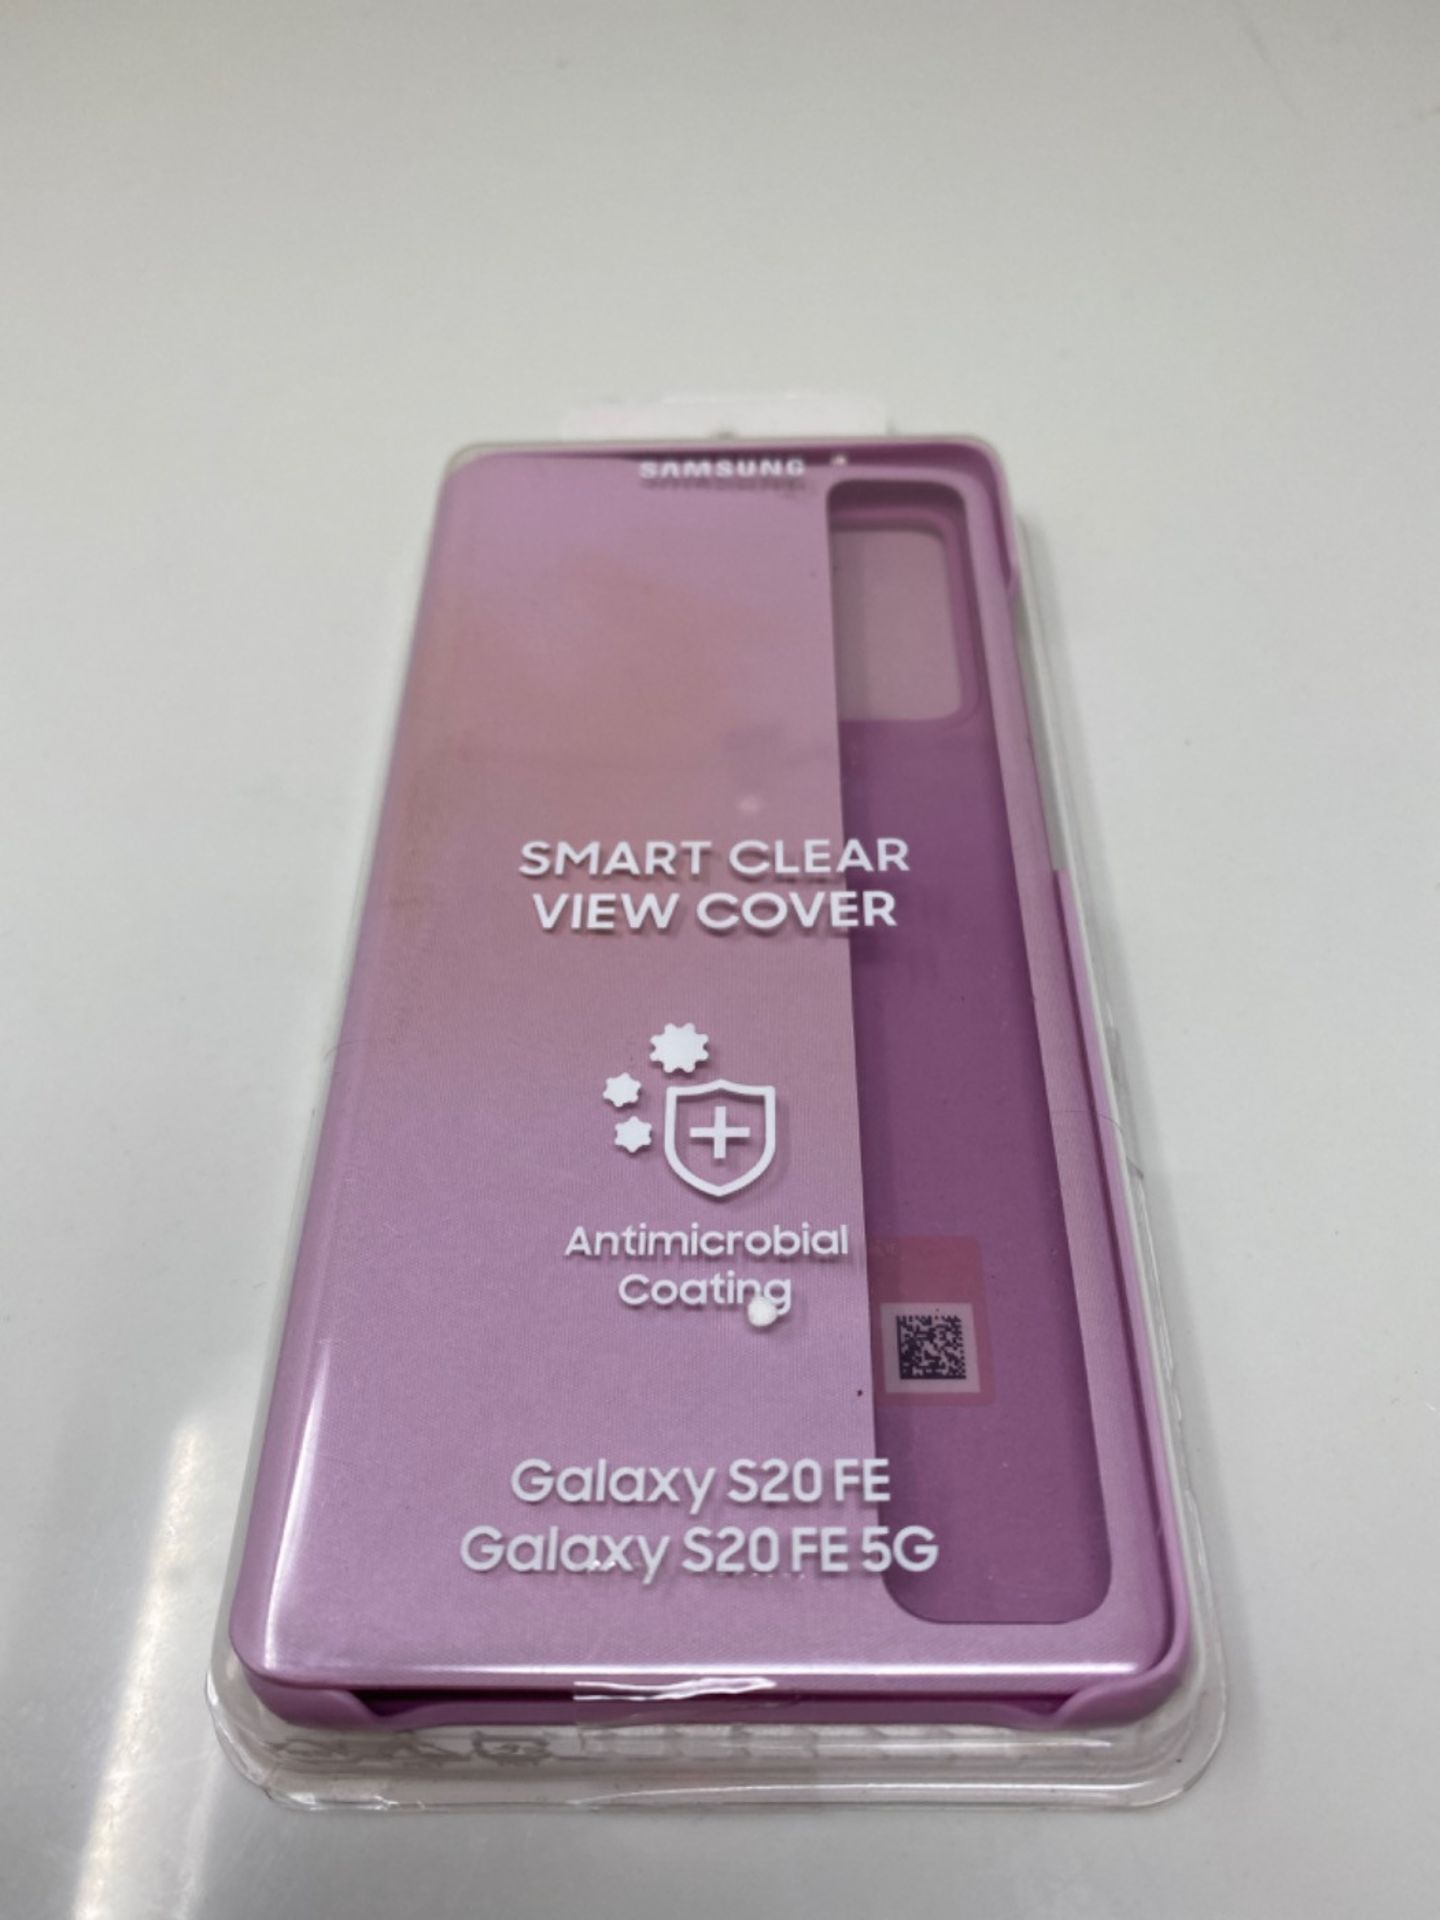 SAMSUNG Clear View Cover Galaxy S20 FE Lavender - Image 2 of 3